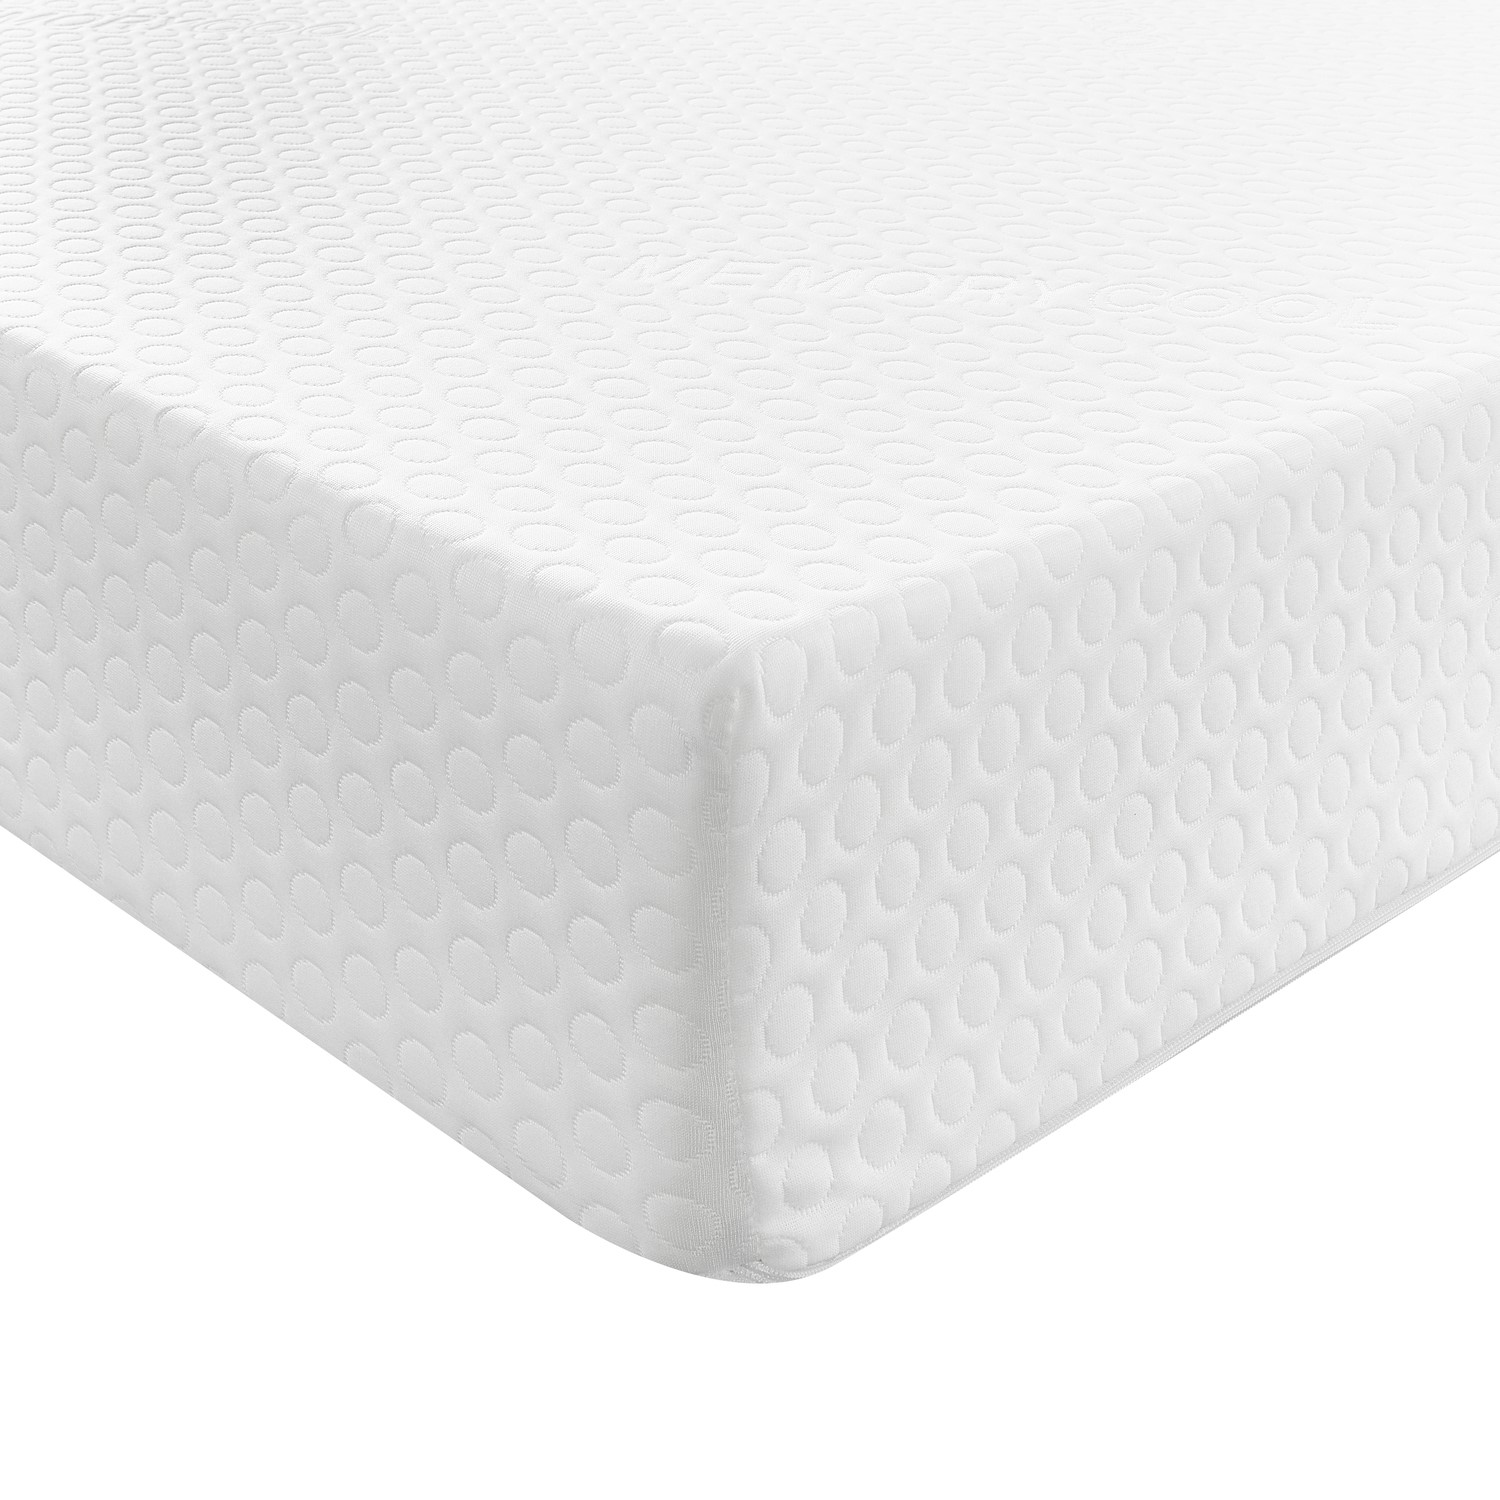 Photo of King size memory foam rolled hypoallergenic mattress with removable cover - aspire